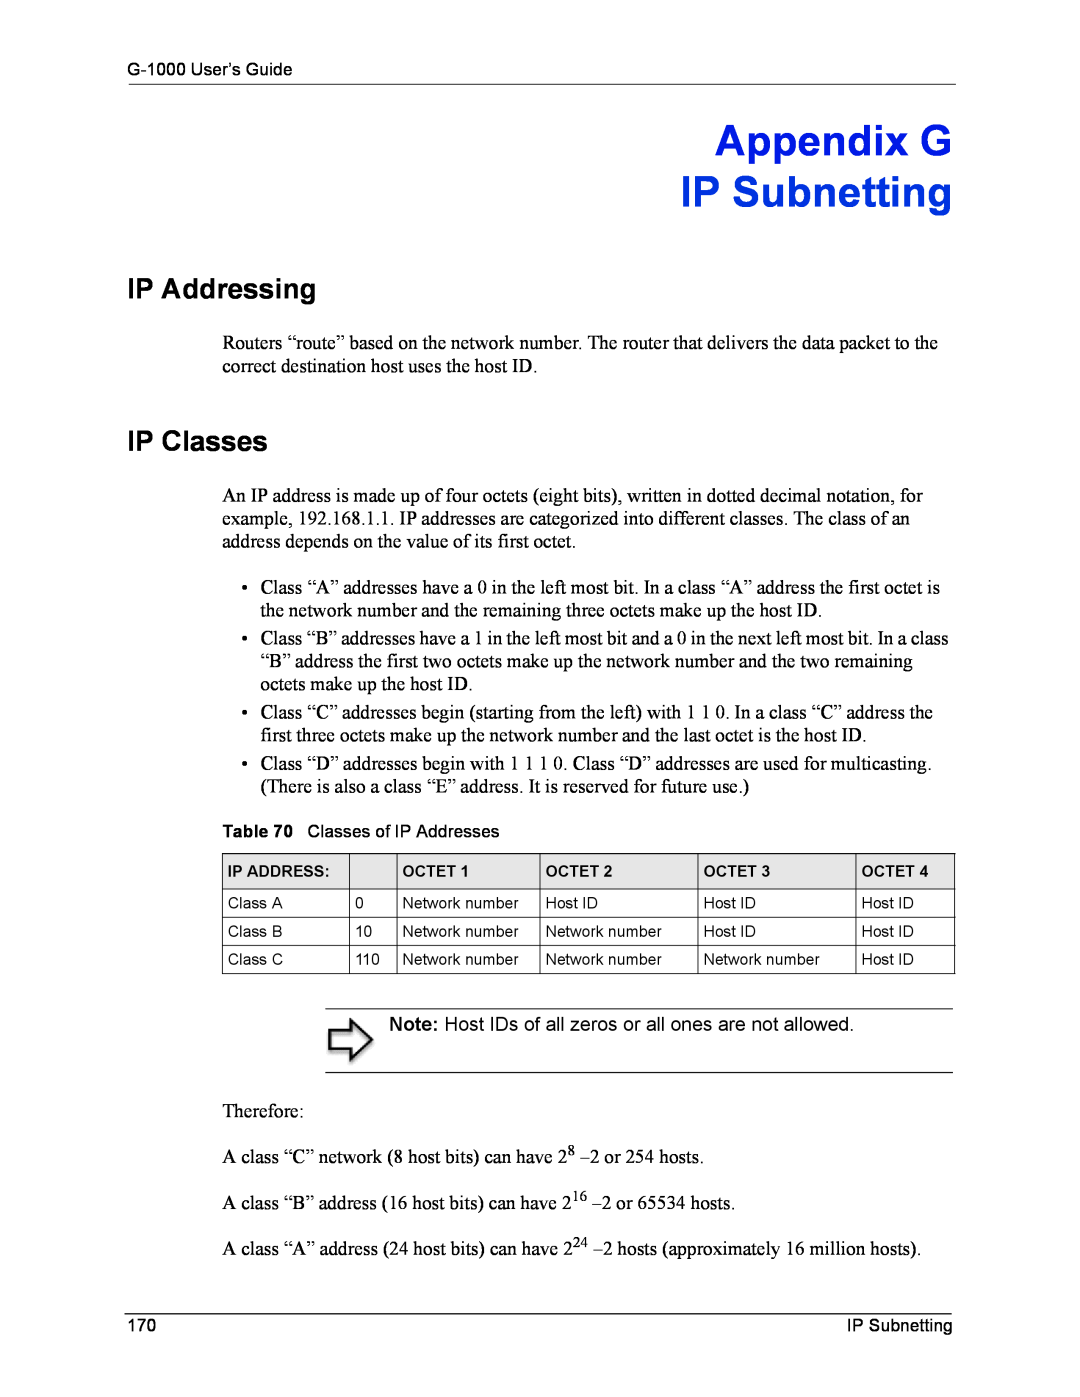 ZyXEL Communications G-1000 manual Appendix G, IP Subnetting, IP Addressing, IP Classes 